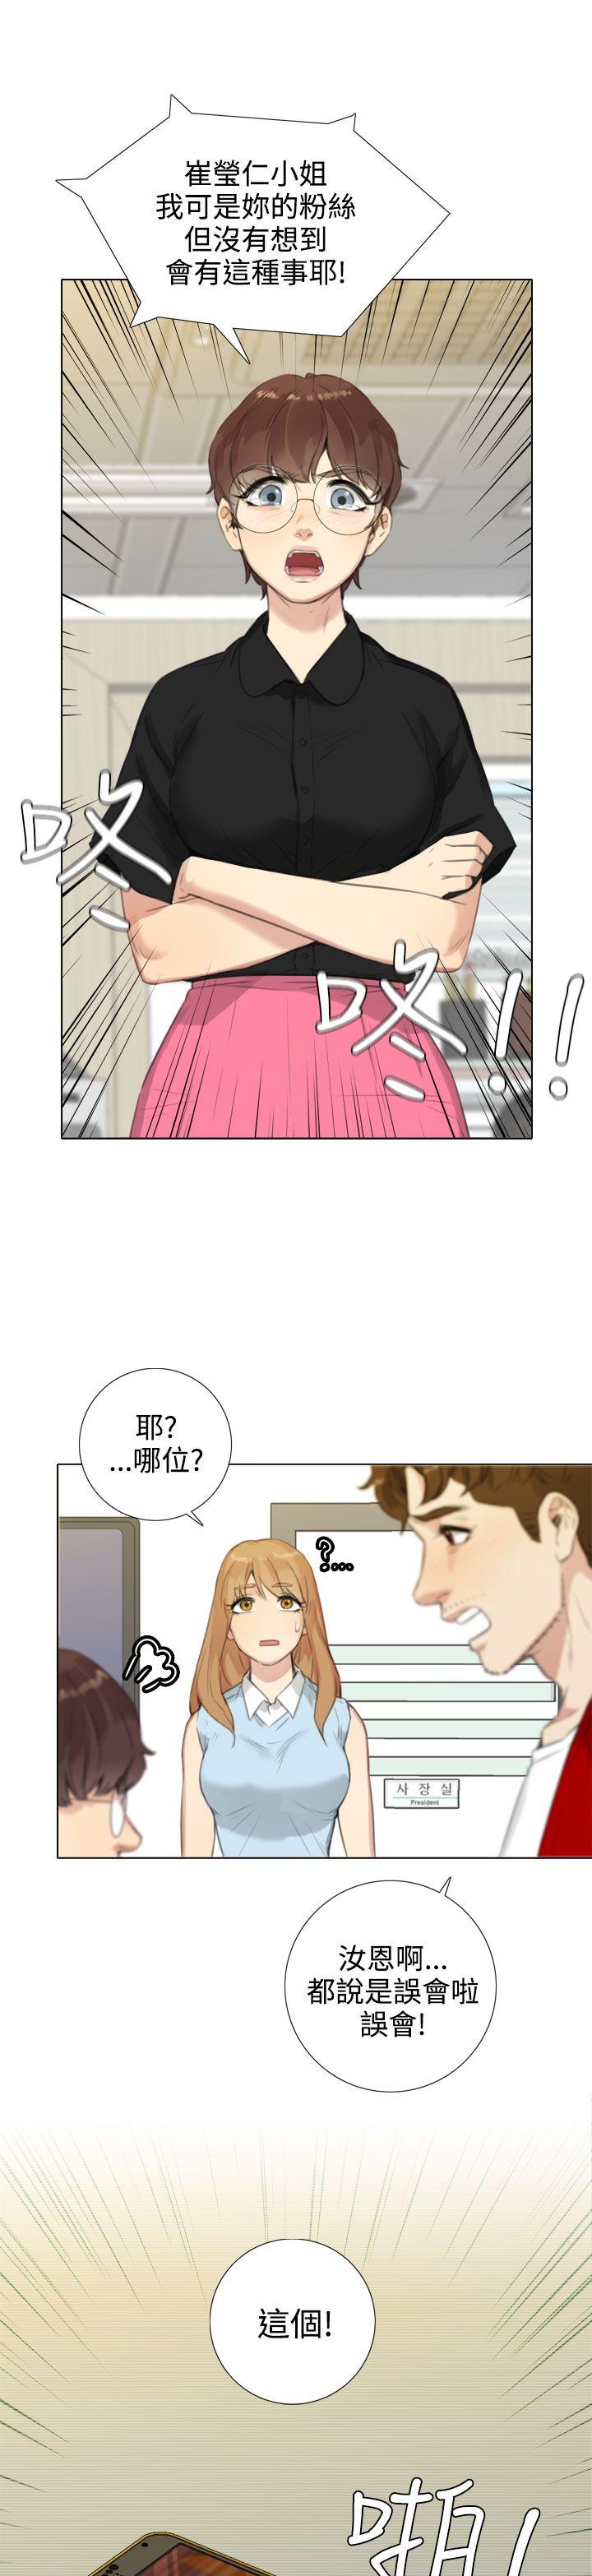 《TOUCH ME》漫画 第20话